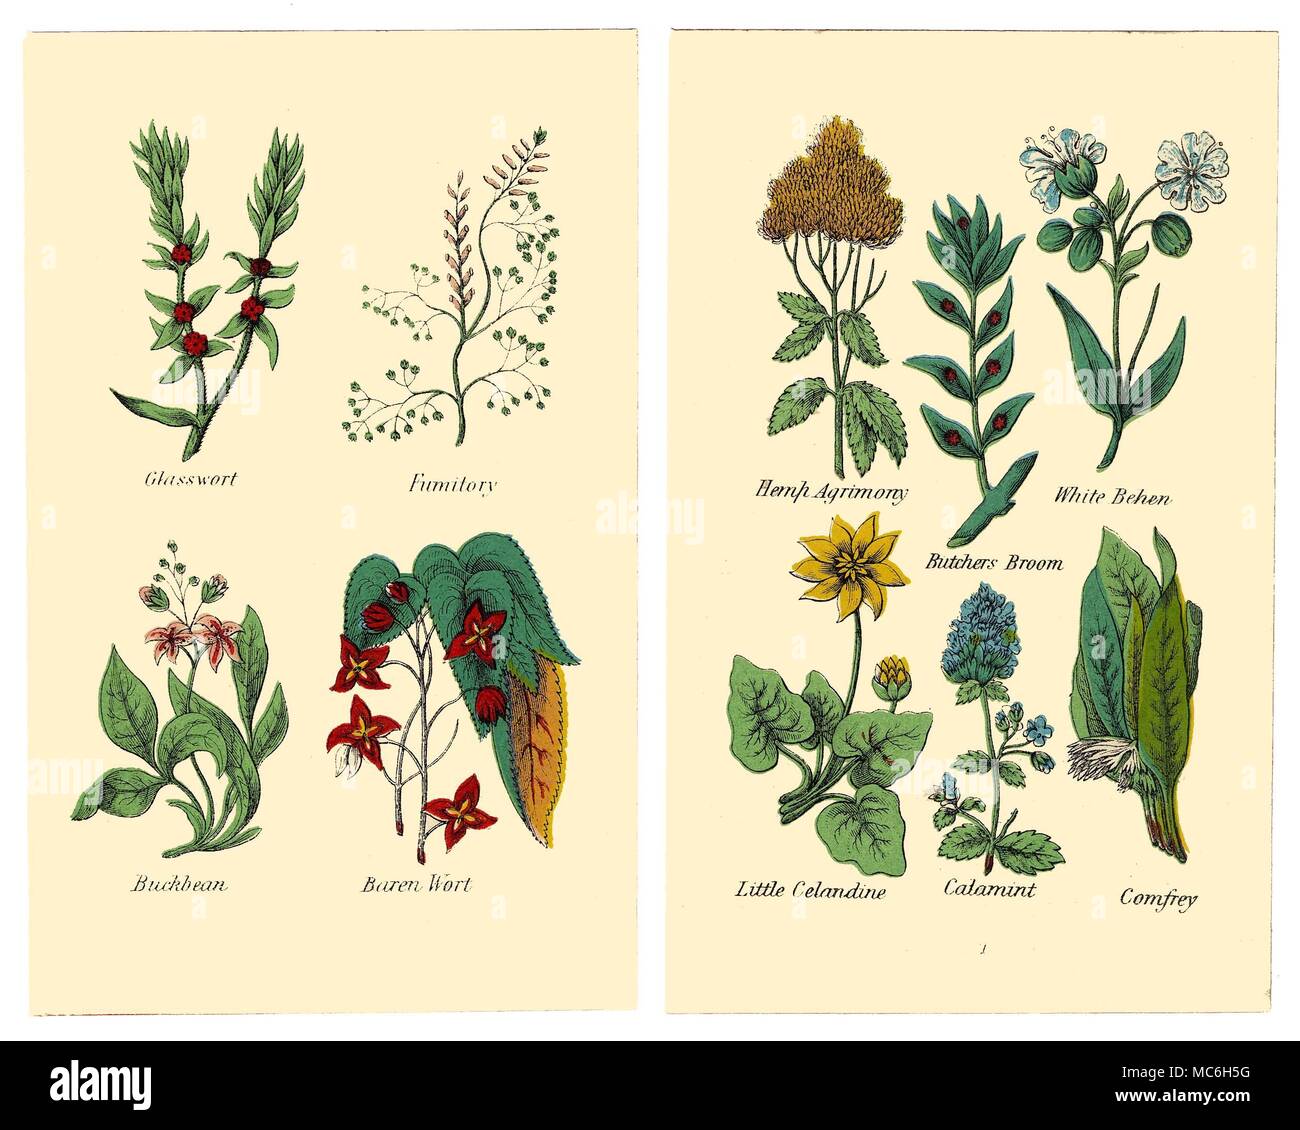 HERBS AND FLOWERS The following plants are from two plates in the 1869 Halifax edition of Matthew Robinson's The New Family Herbal. Glasswort, Fumitory, Buckbean, Baren Wort. Hemp Agrimony, White Behen, Butcher's Broom, Little Celandine, Calamint, Comprey. Stock Photo